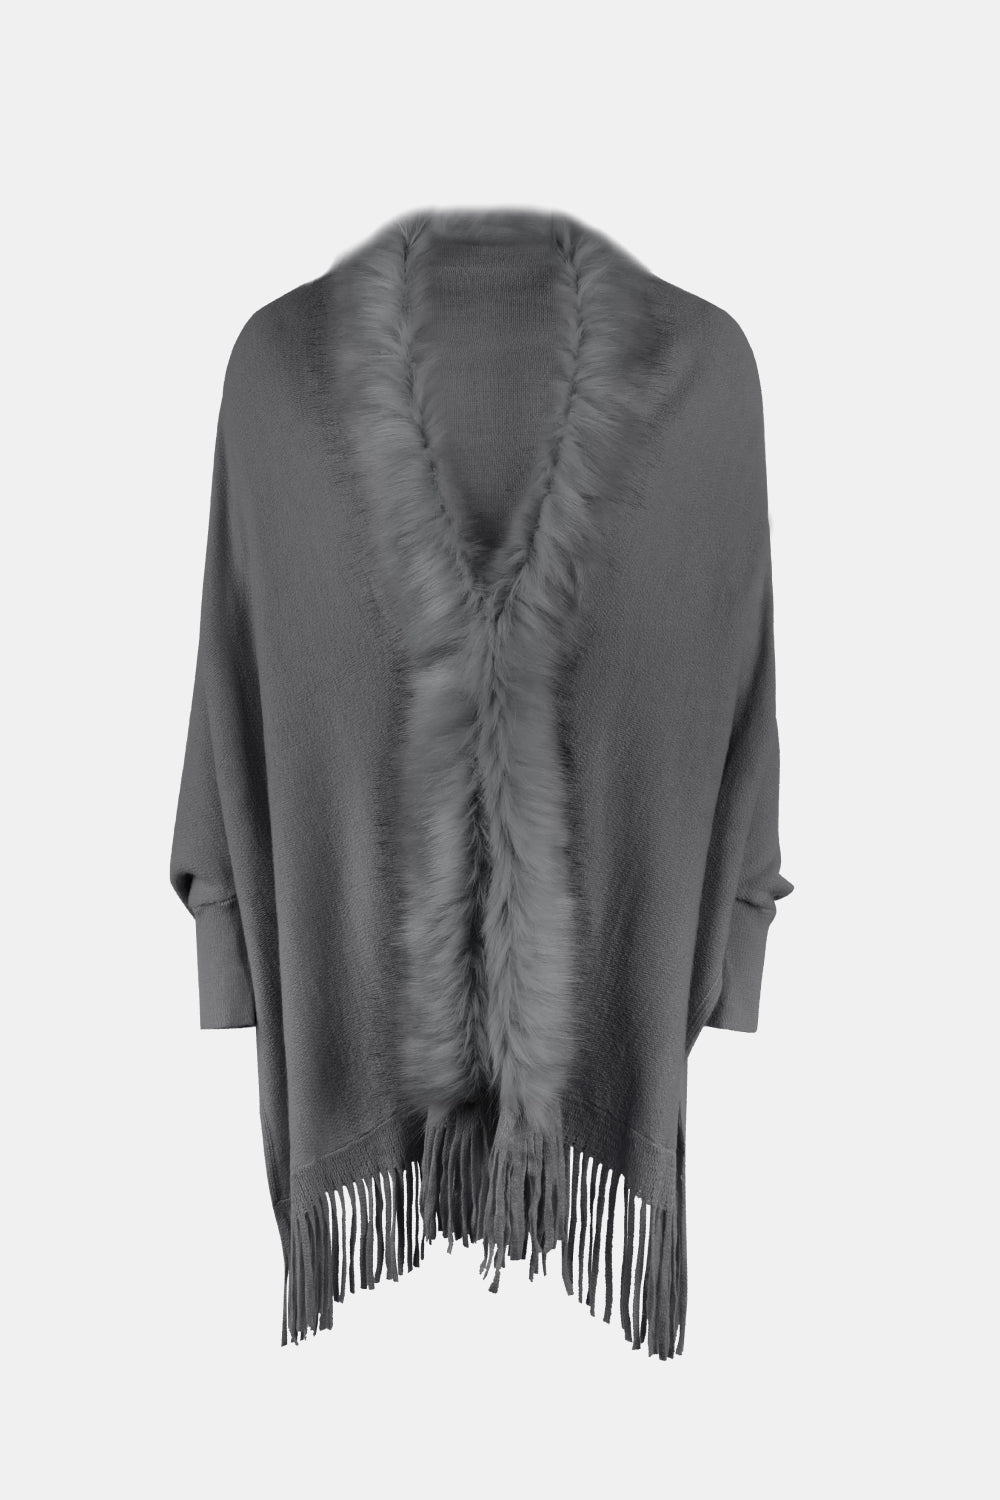 Fringe Open Front Long Sleeve Poncho - Thandynie